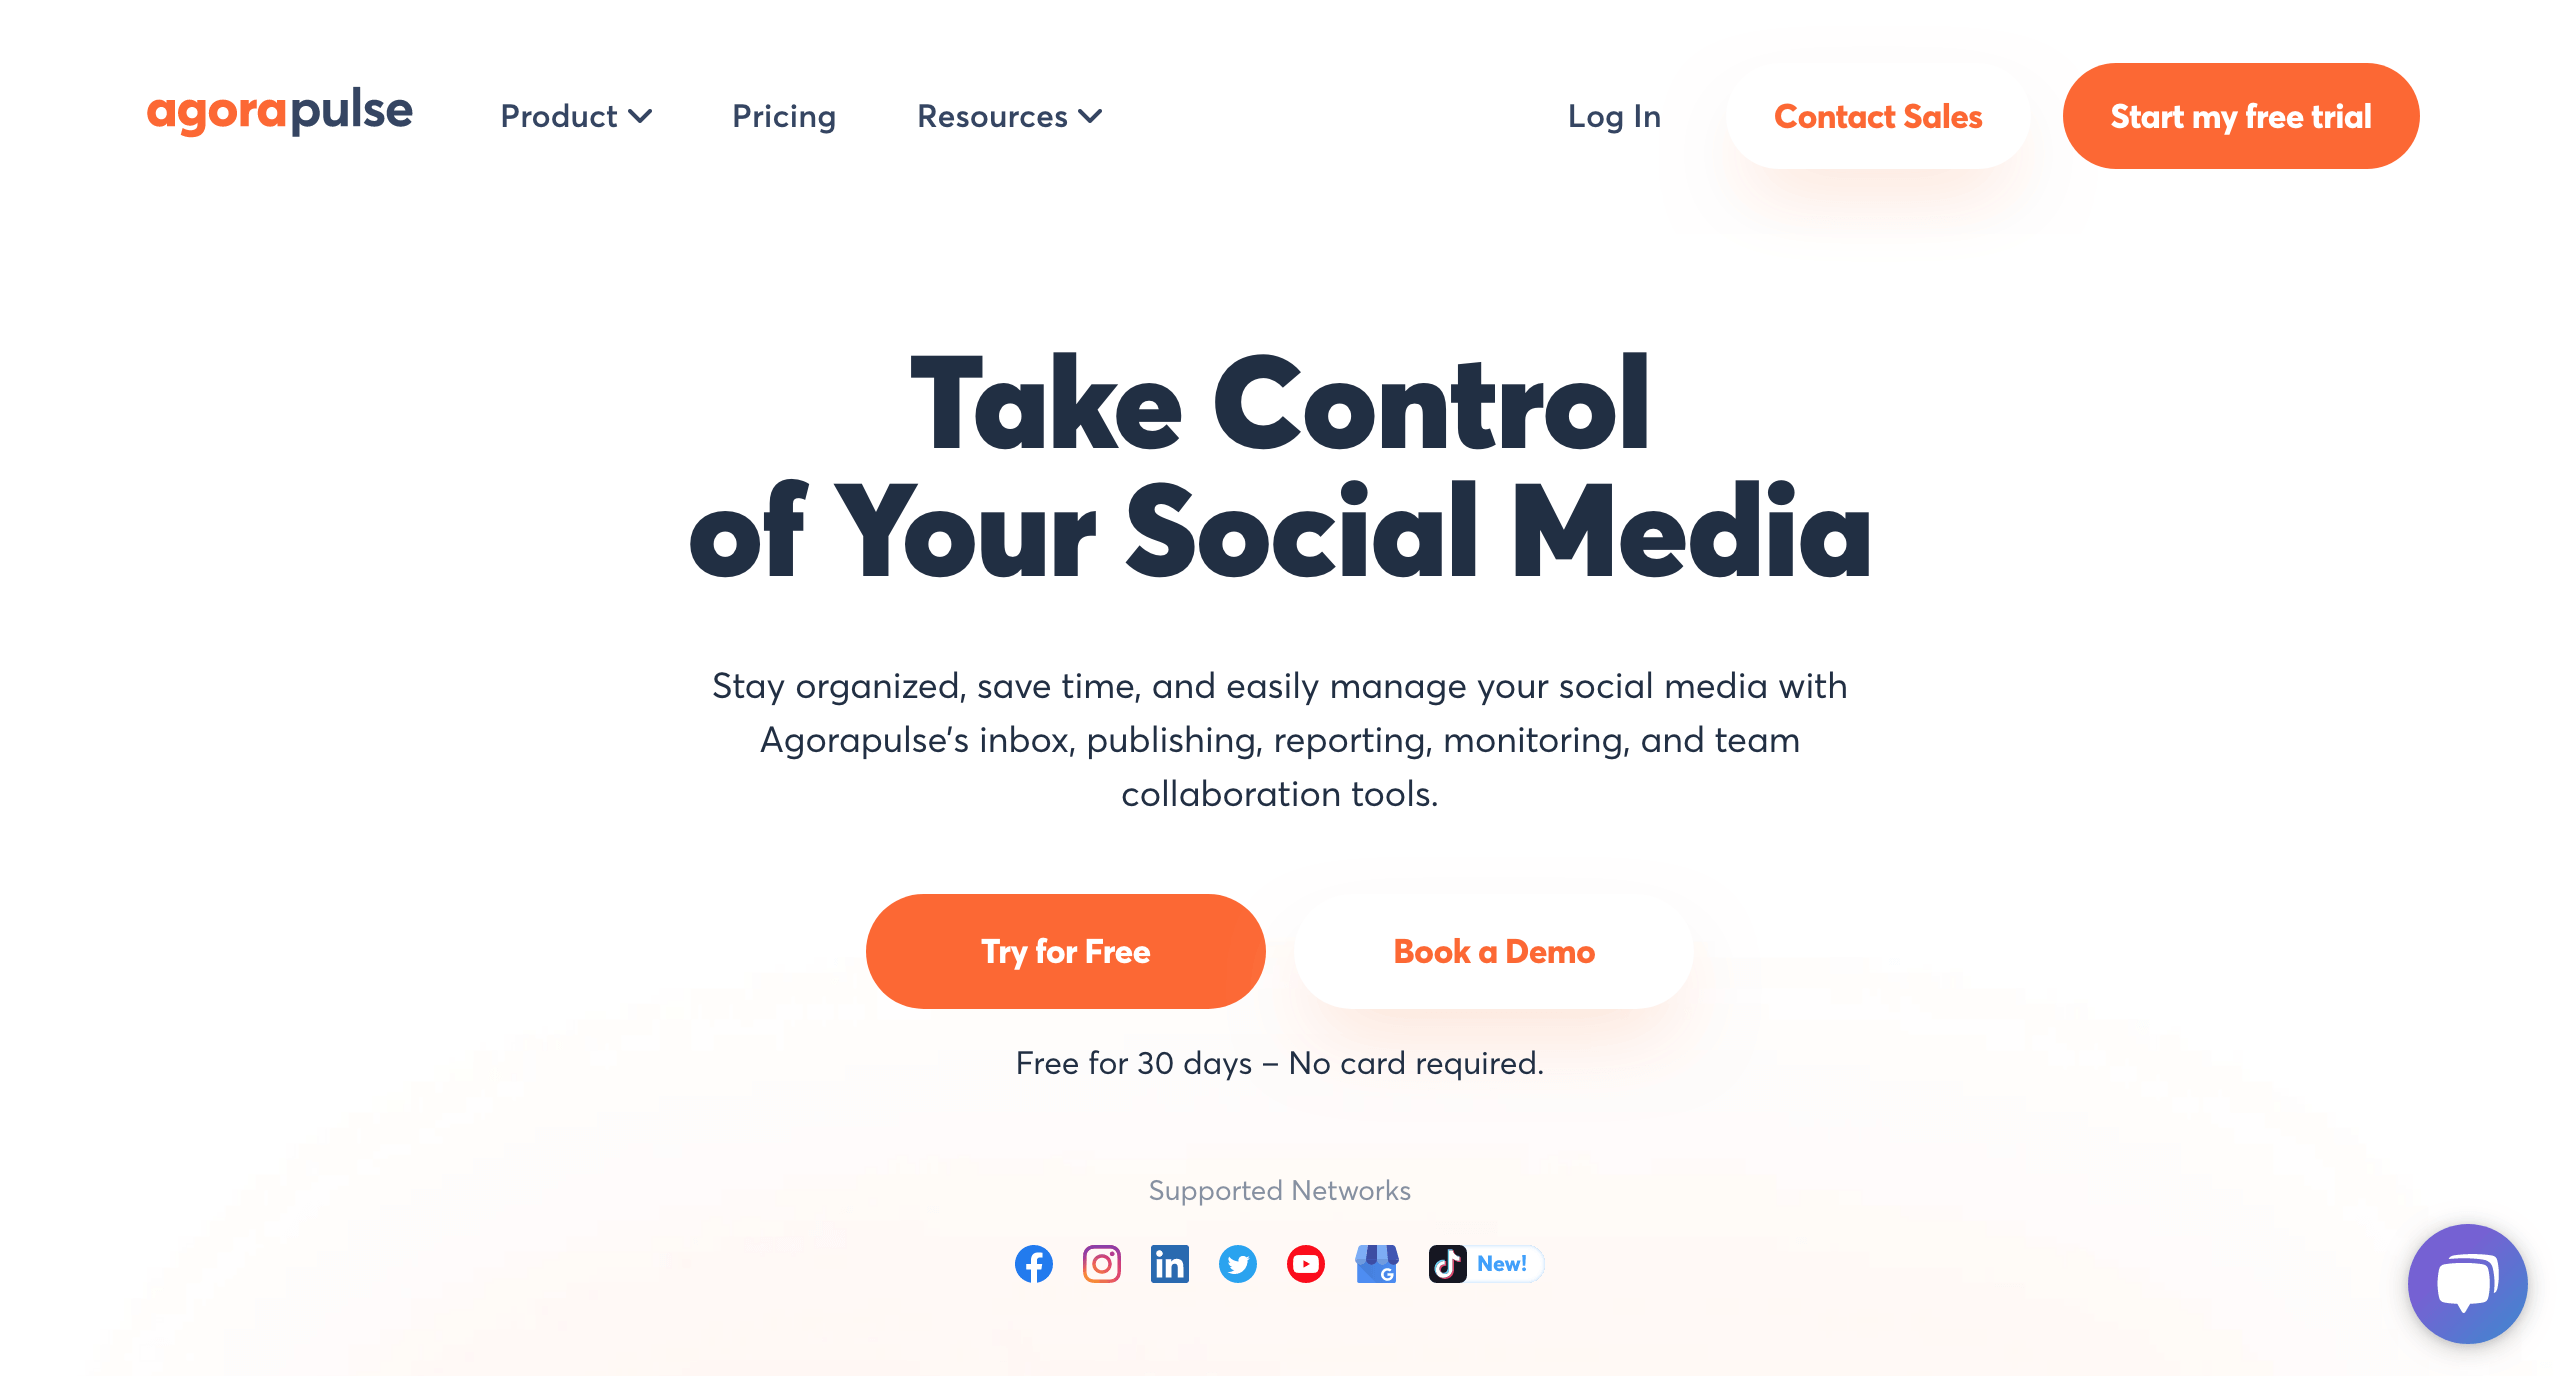 Agorapulse homepage, a Social media management tool that allows to schedule posts and gather audience insights